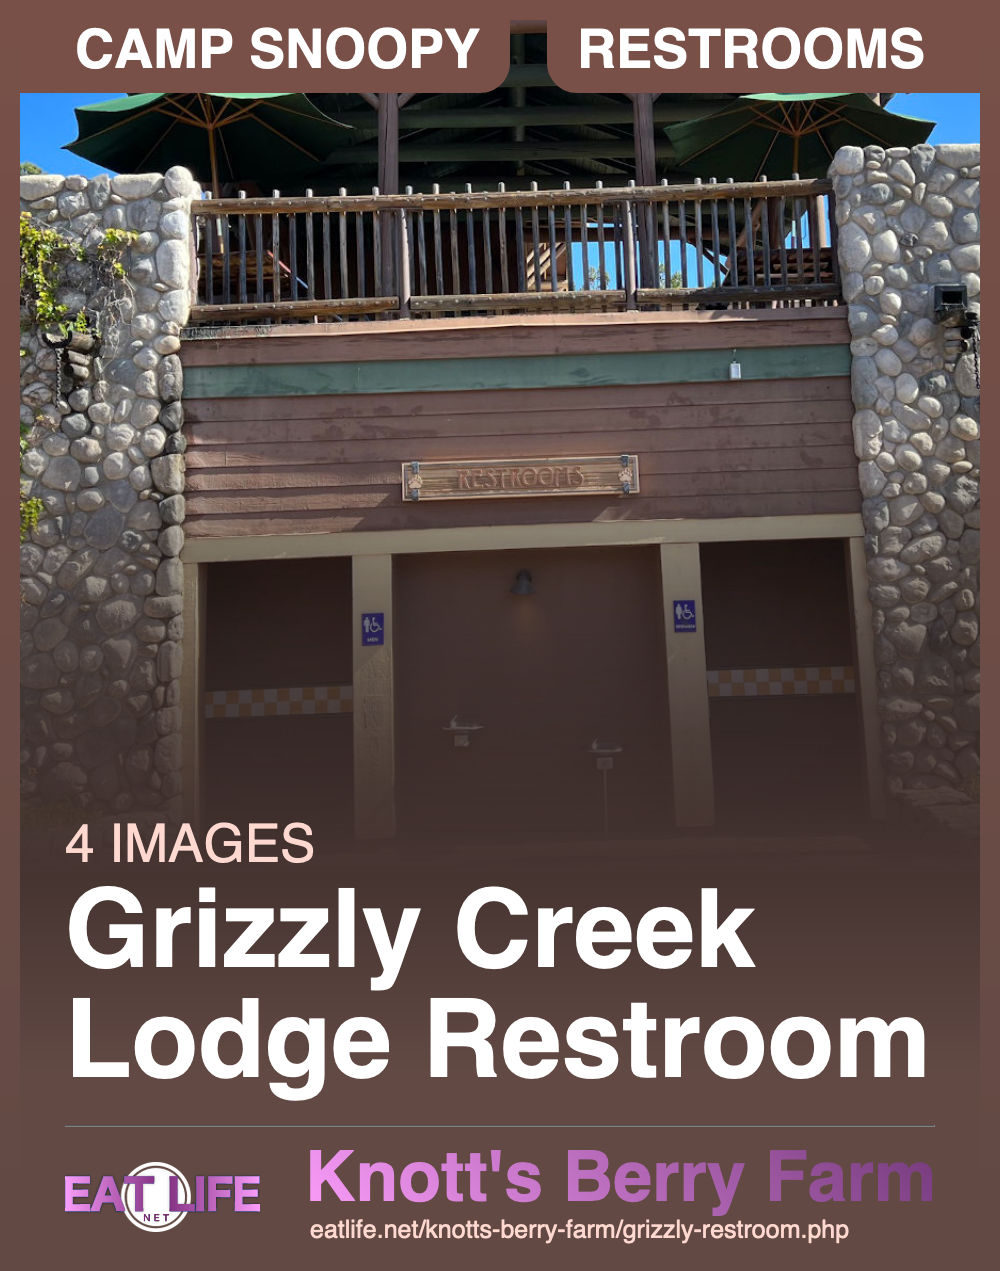 Grizzly Creek Lodge Restroom